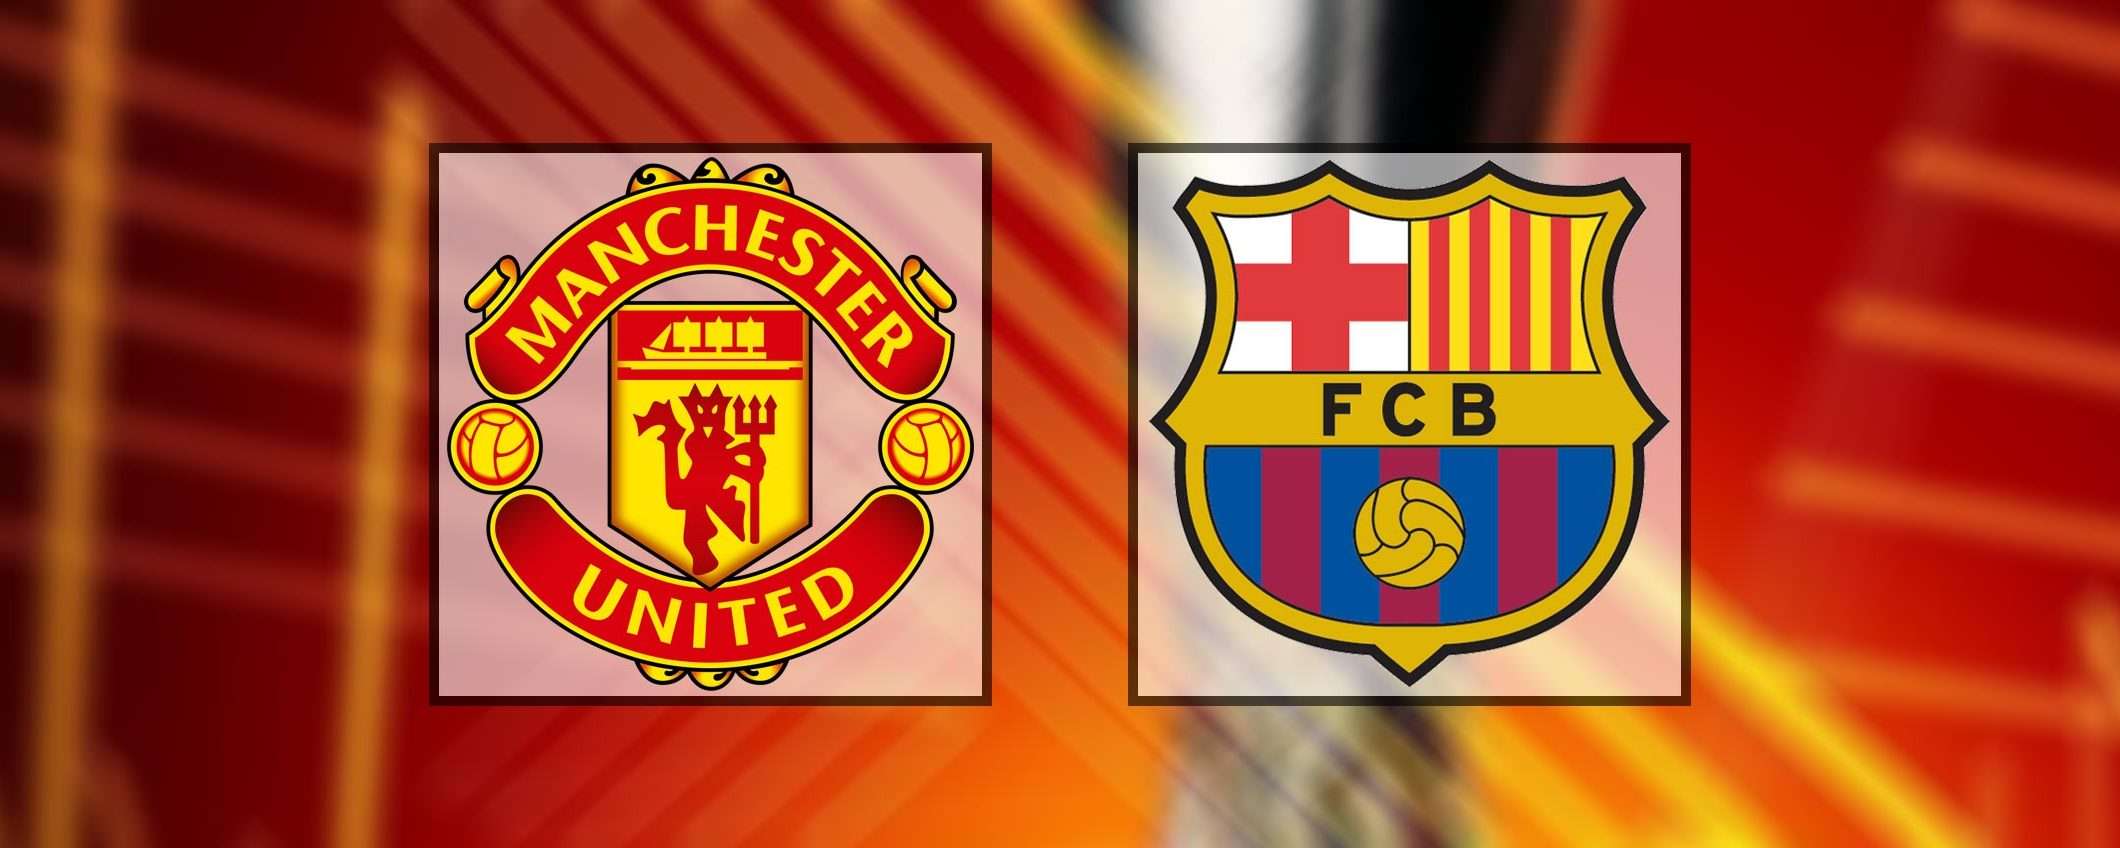 Come vedere Manchester United-Barcellona in streaming